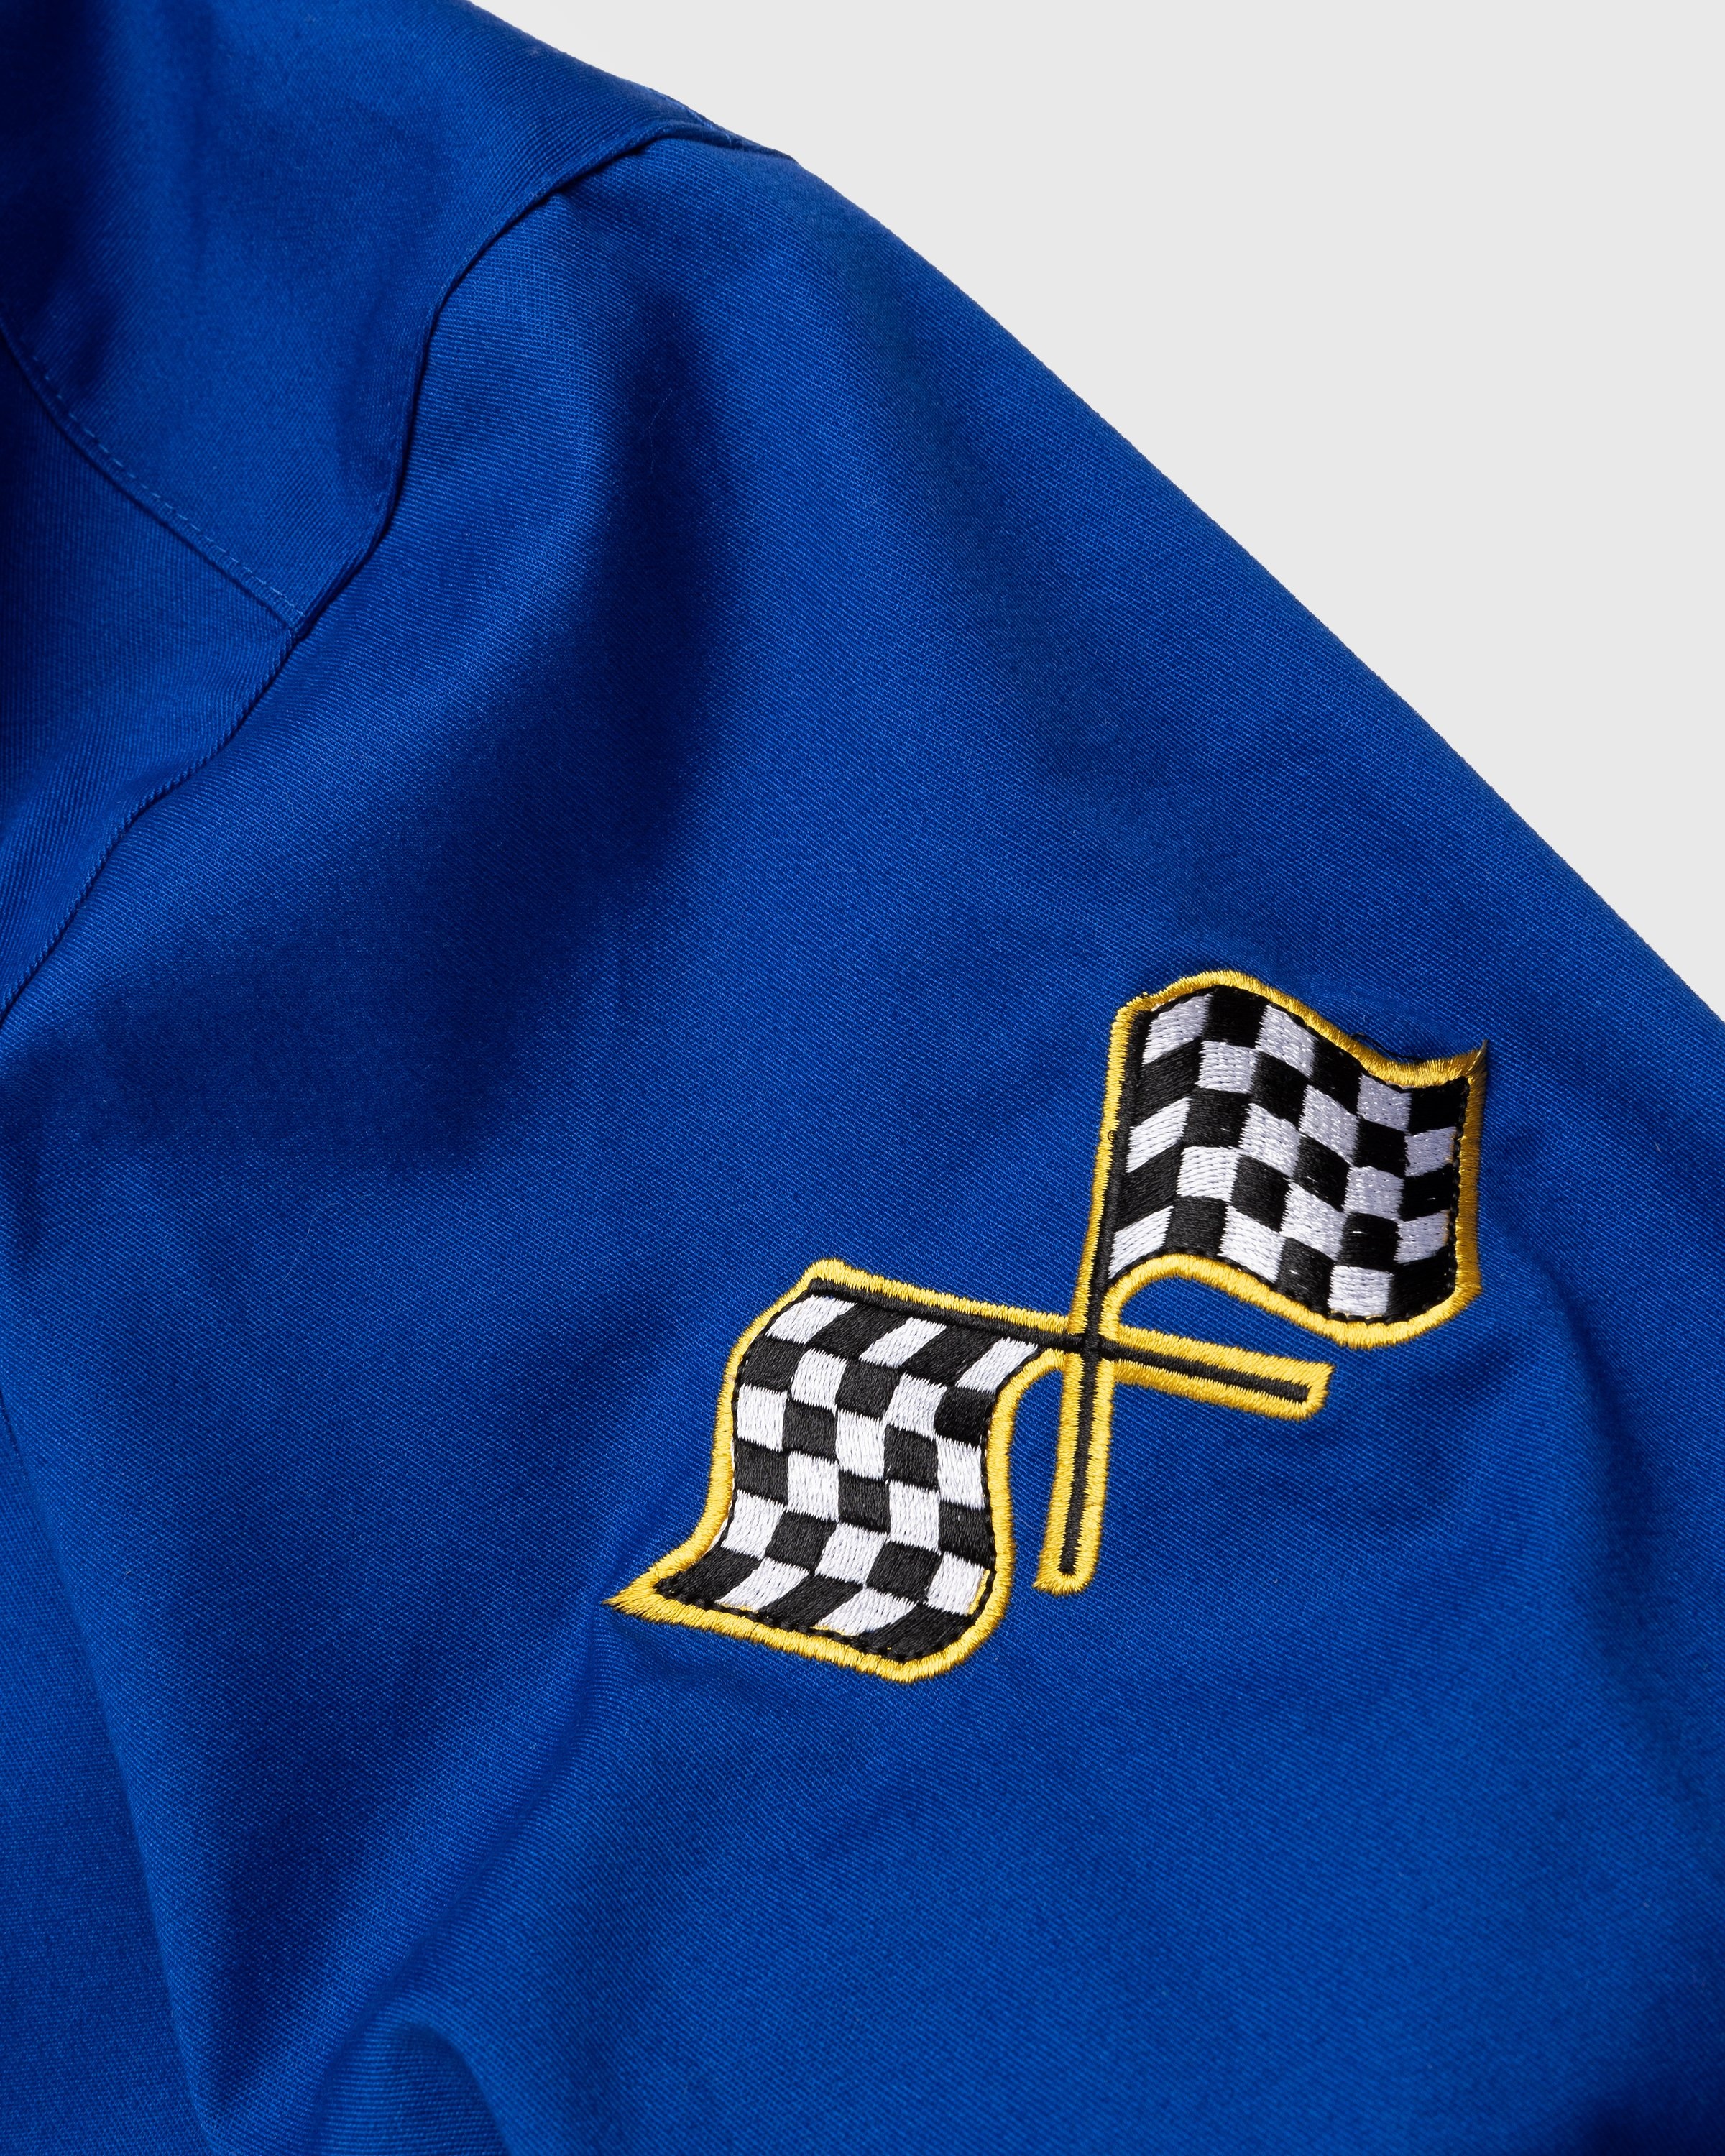 Adidas – Sean Wotherspoon x Hot Wheels Race Jacket Blue - Jackets - Blue - Image 9